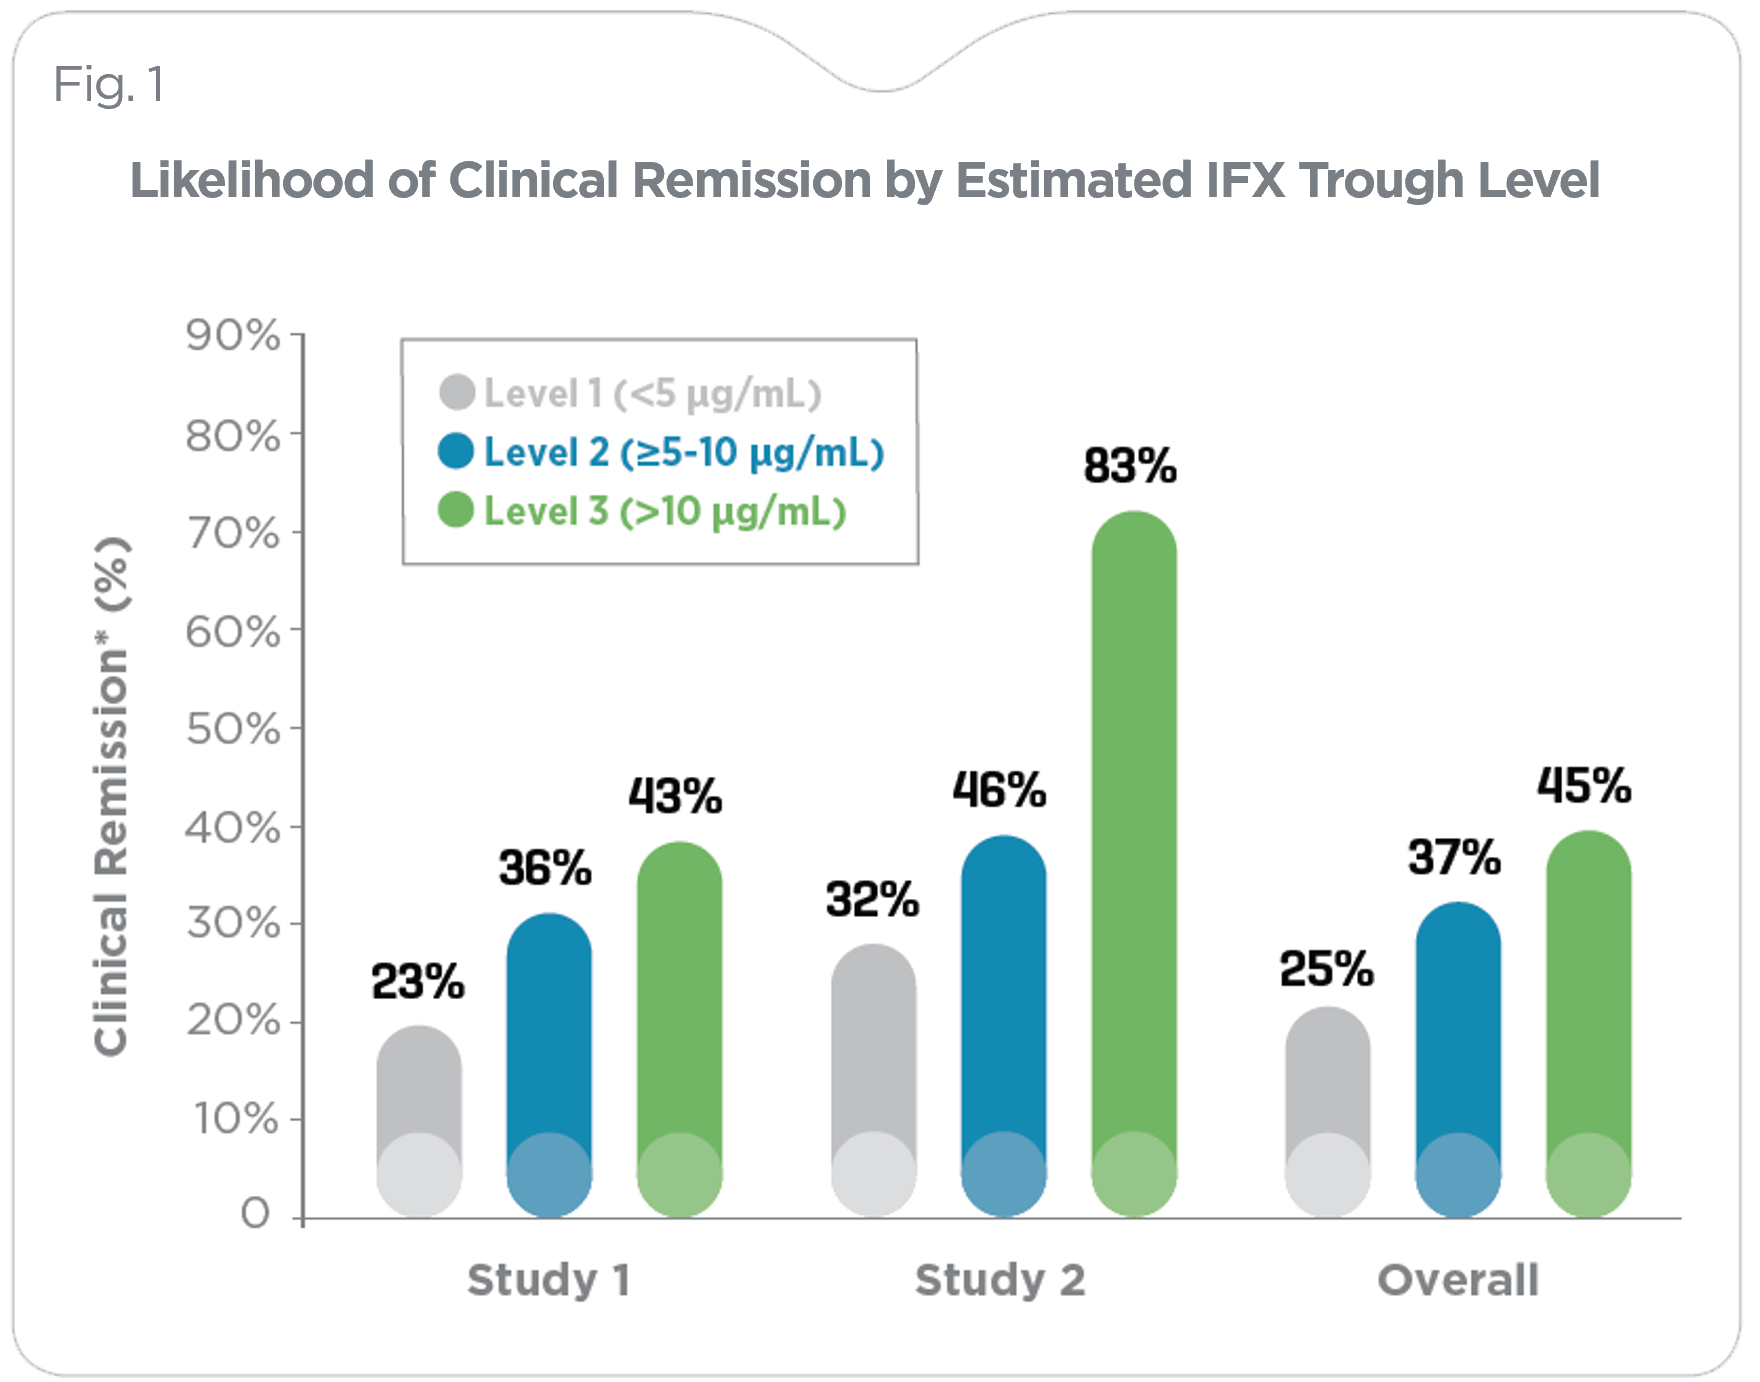 [Chart] Section 3 - Likelihood of Clinical Remission by Est IFX_20230314